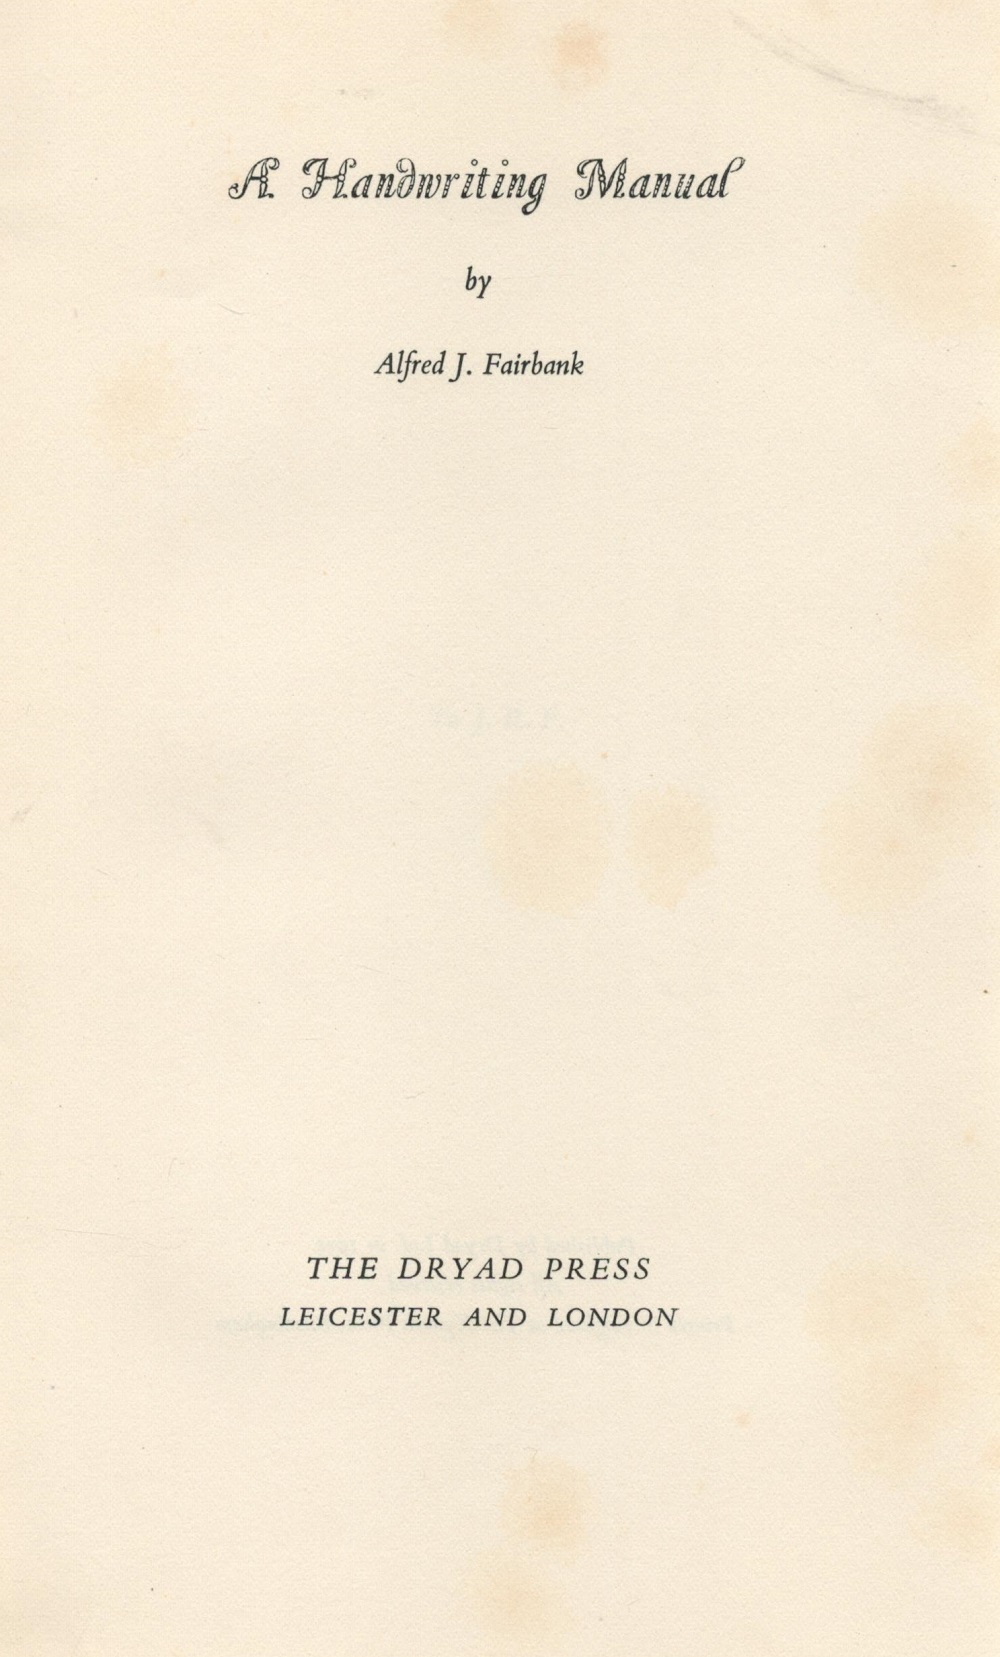 A Handwriting Manual by Alfred J Fairbank Hardback Book 1932 First Edition published by Dryad Ltd - Image 2 of 3